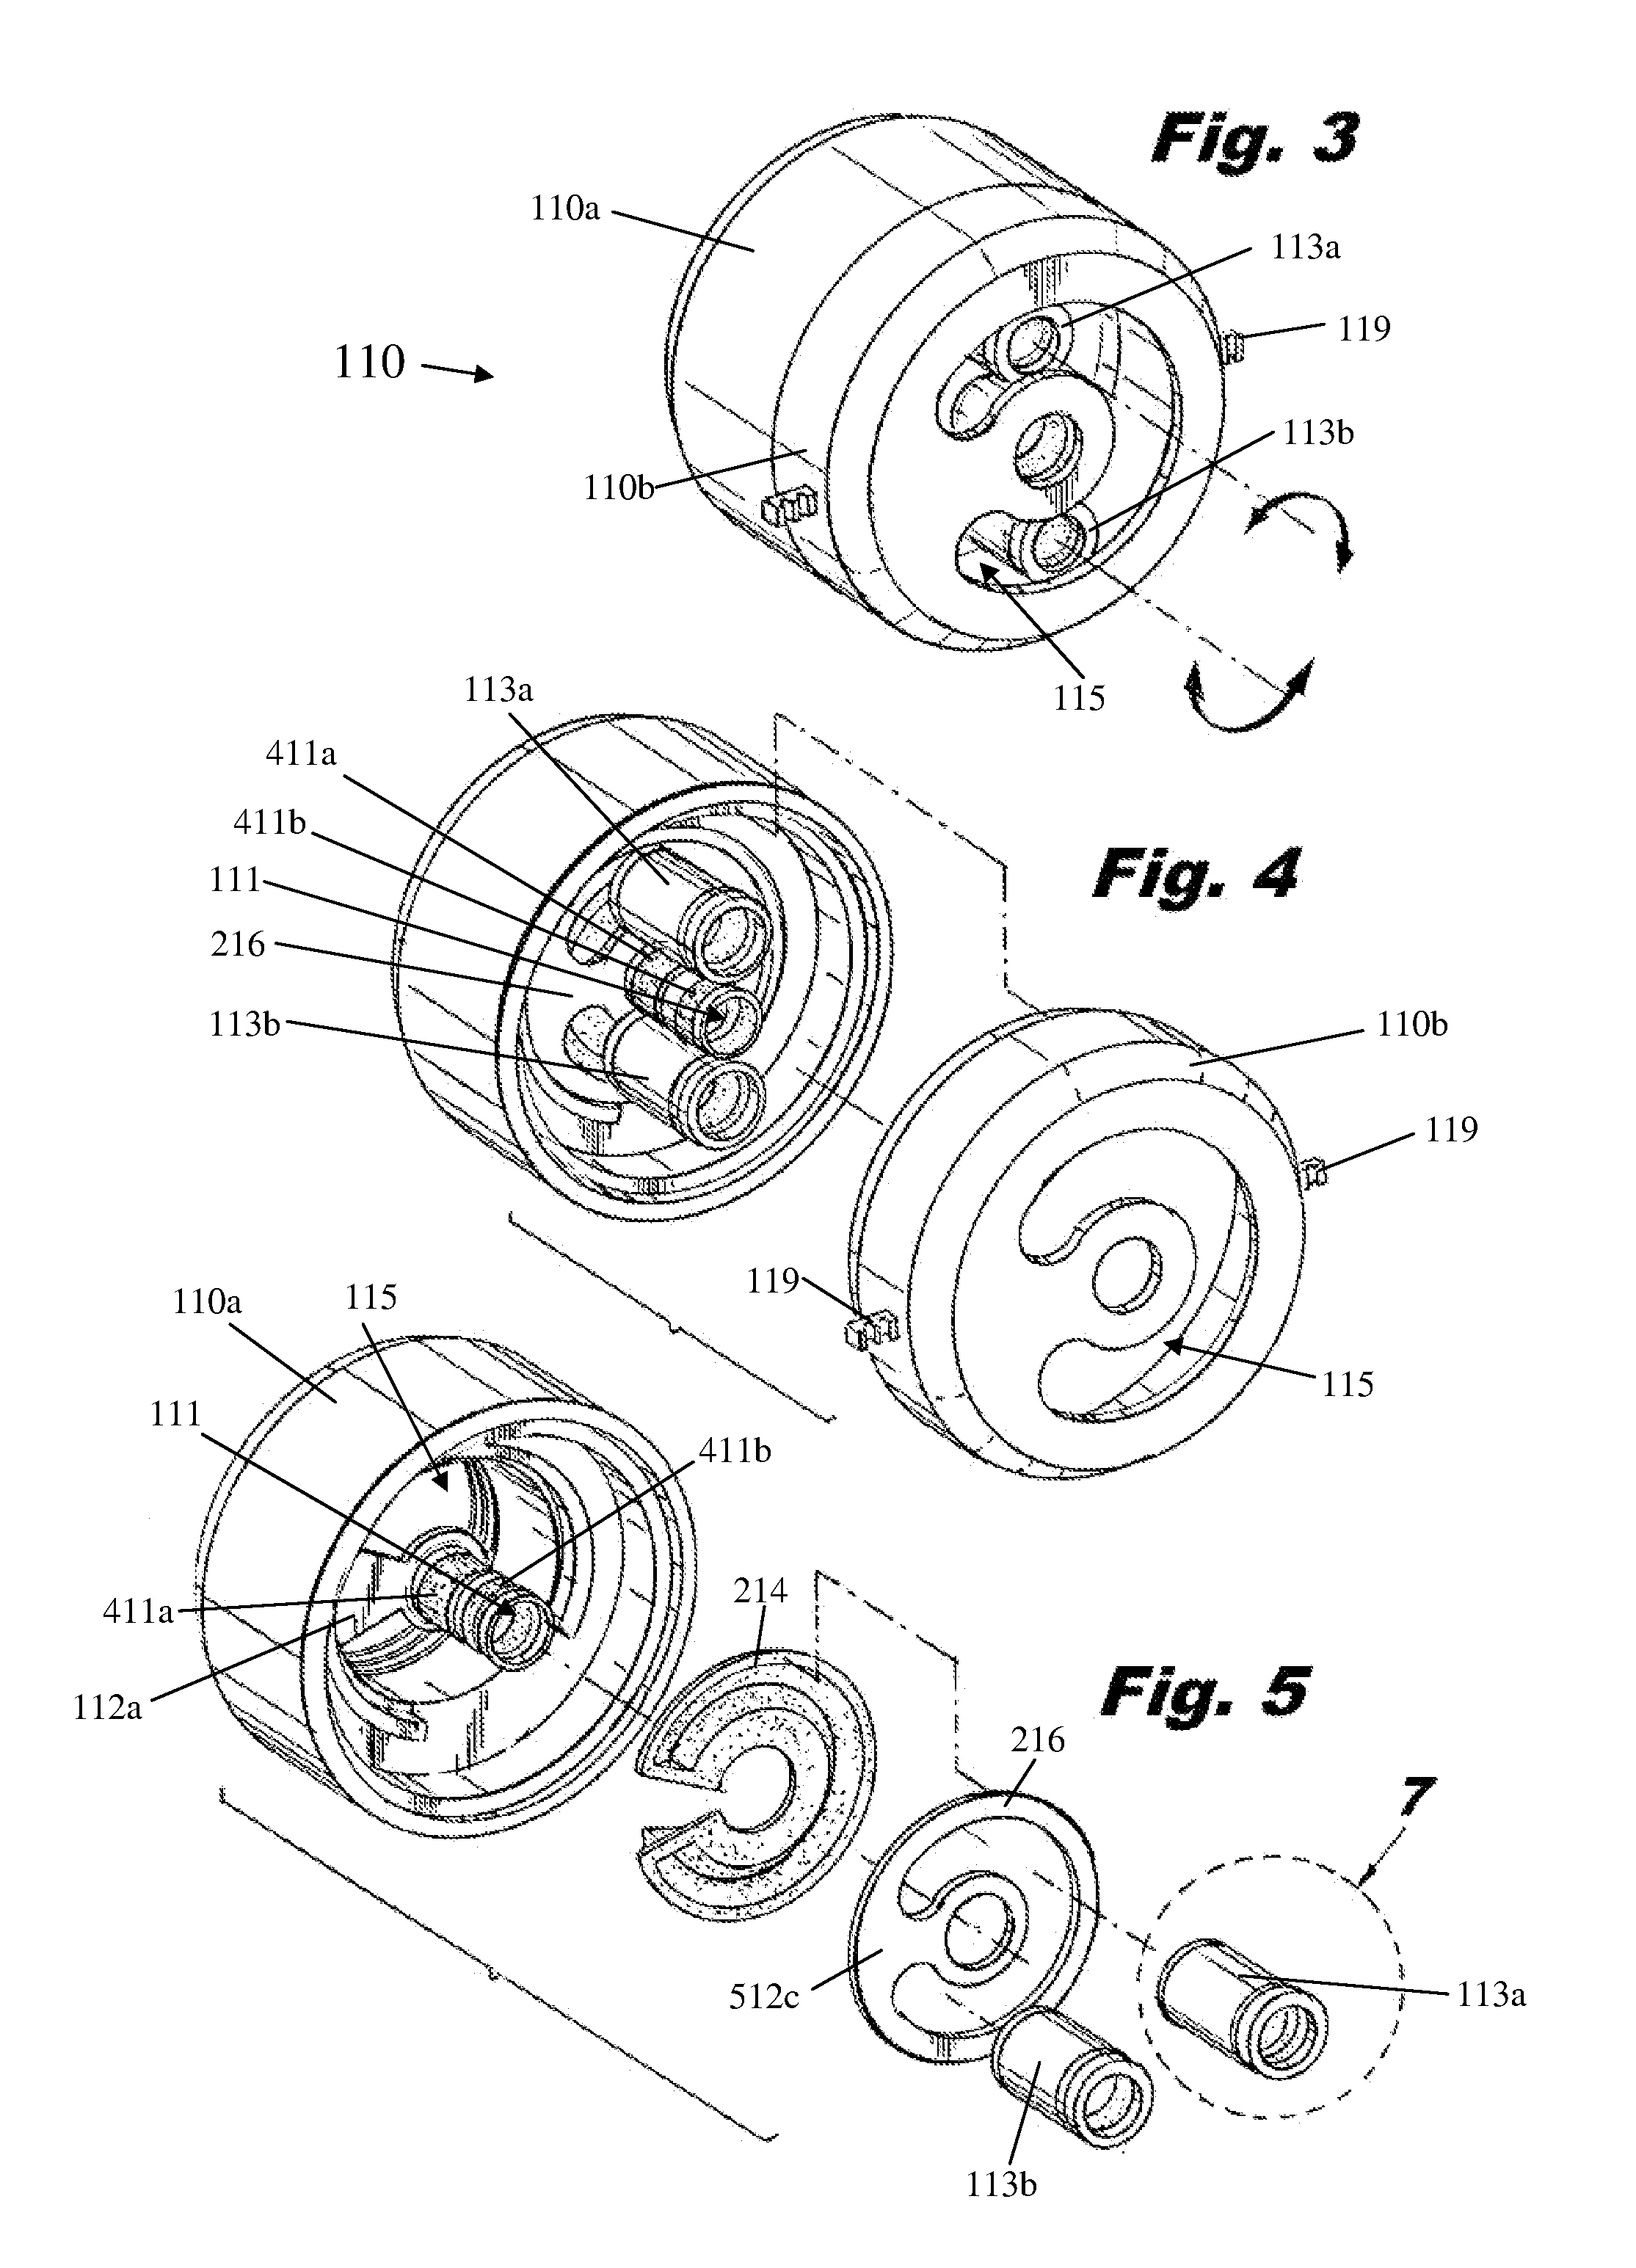 Surgical access device with moveable device port